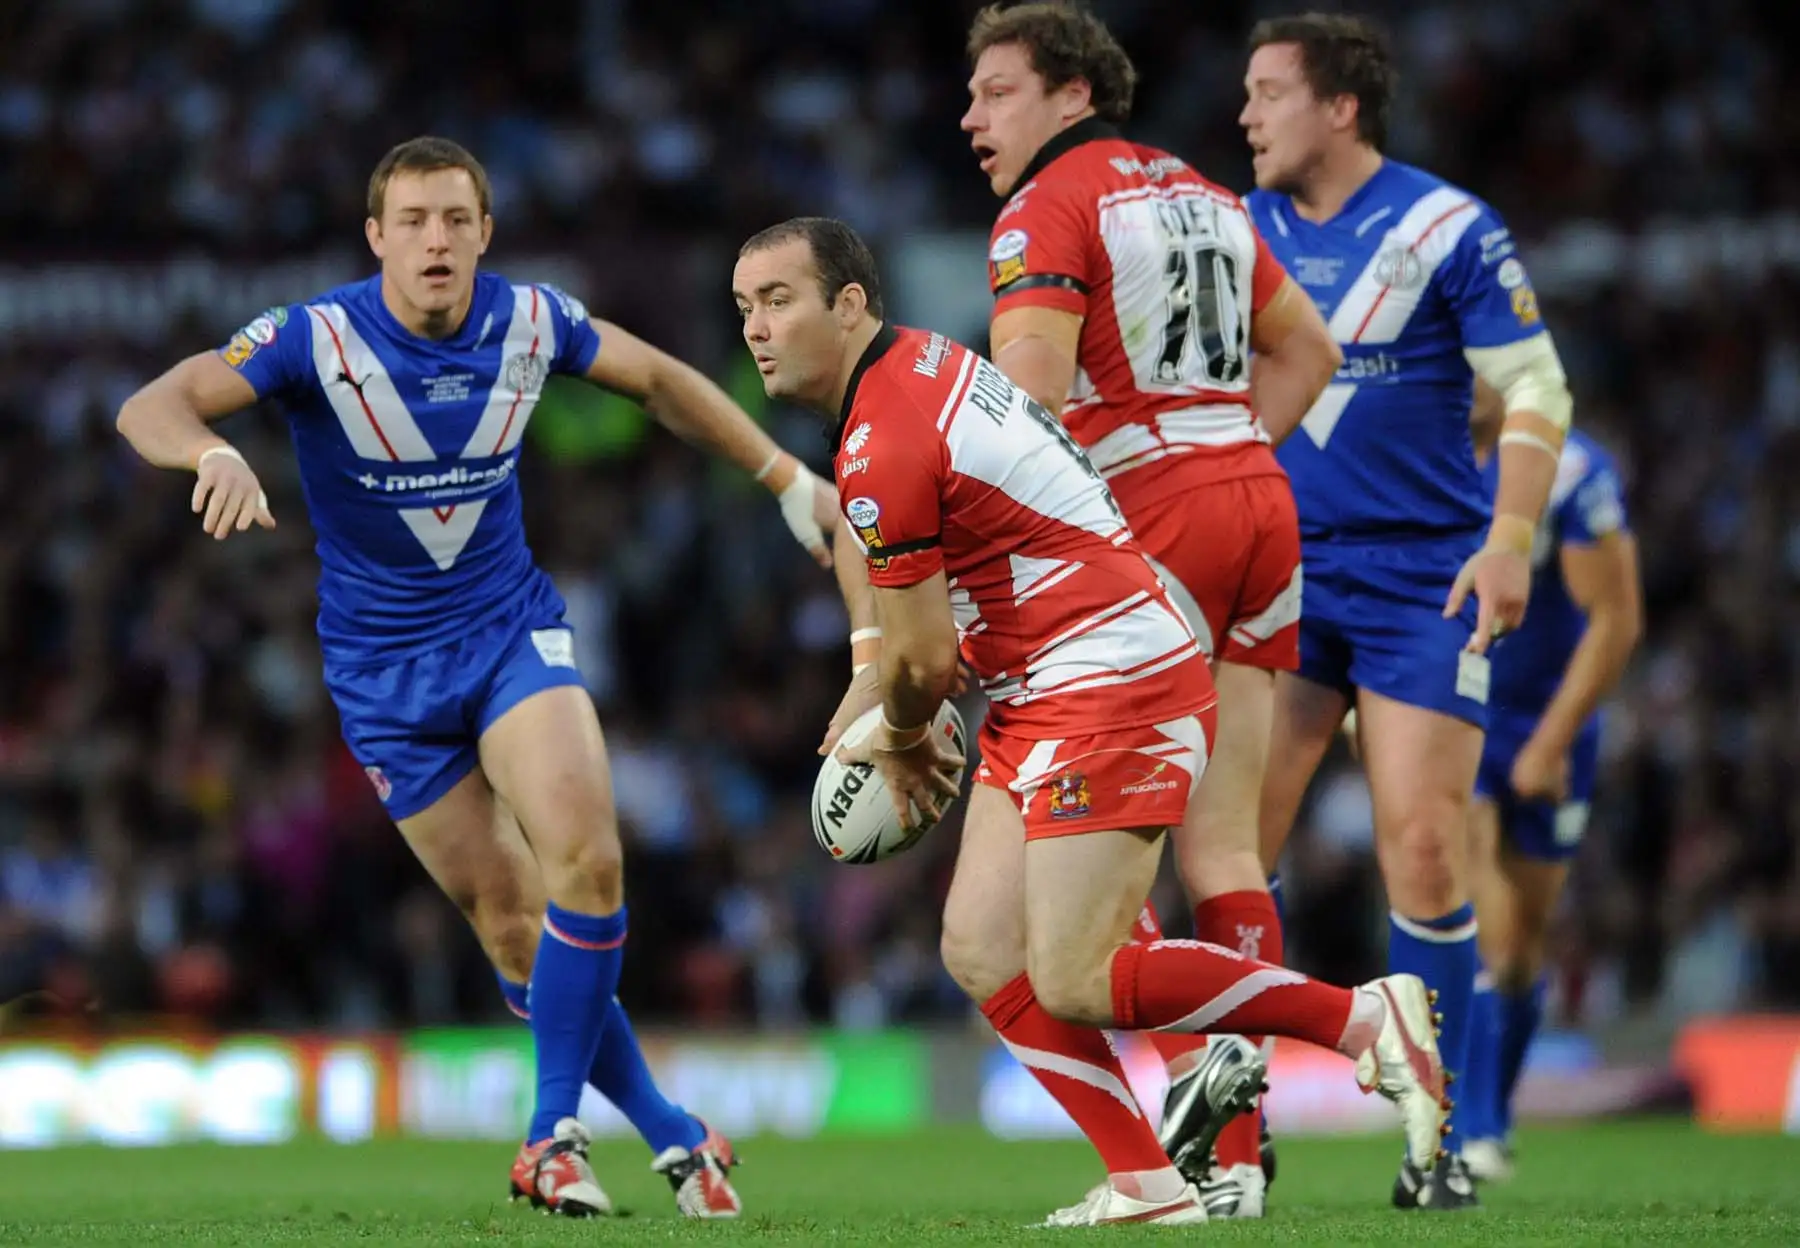 Mark Riddell looks back on his spell with Wigan with fond memories